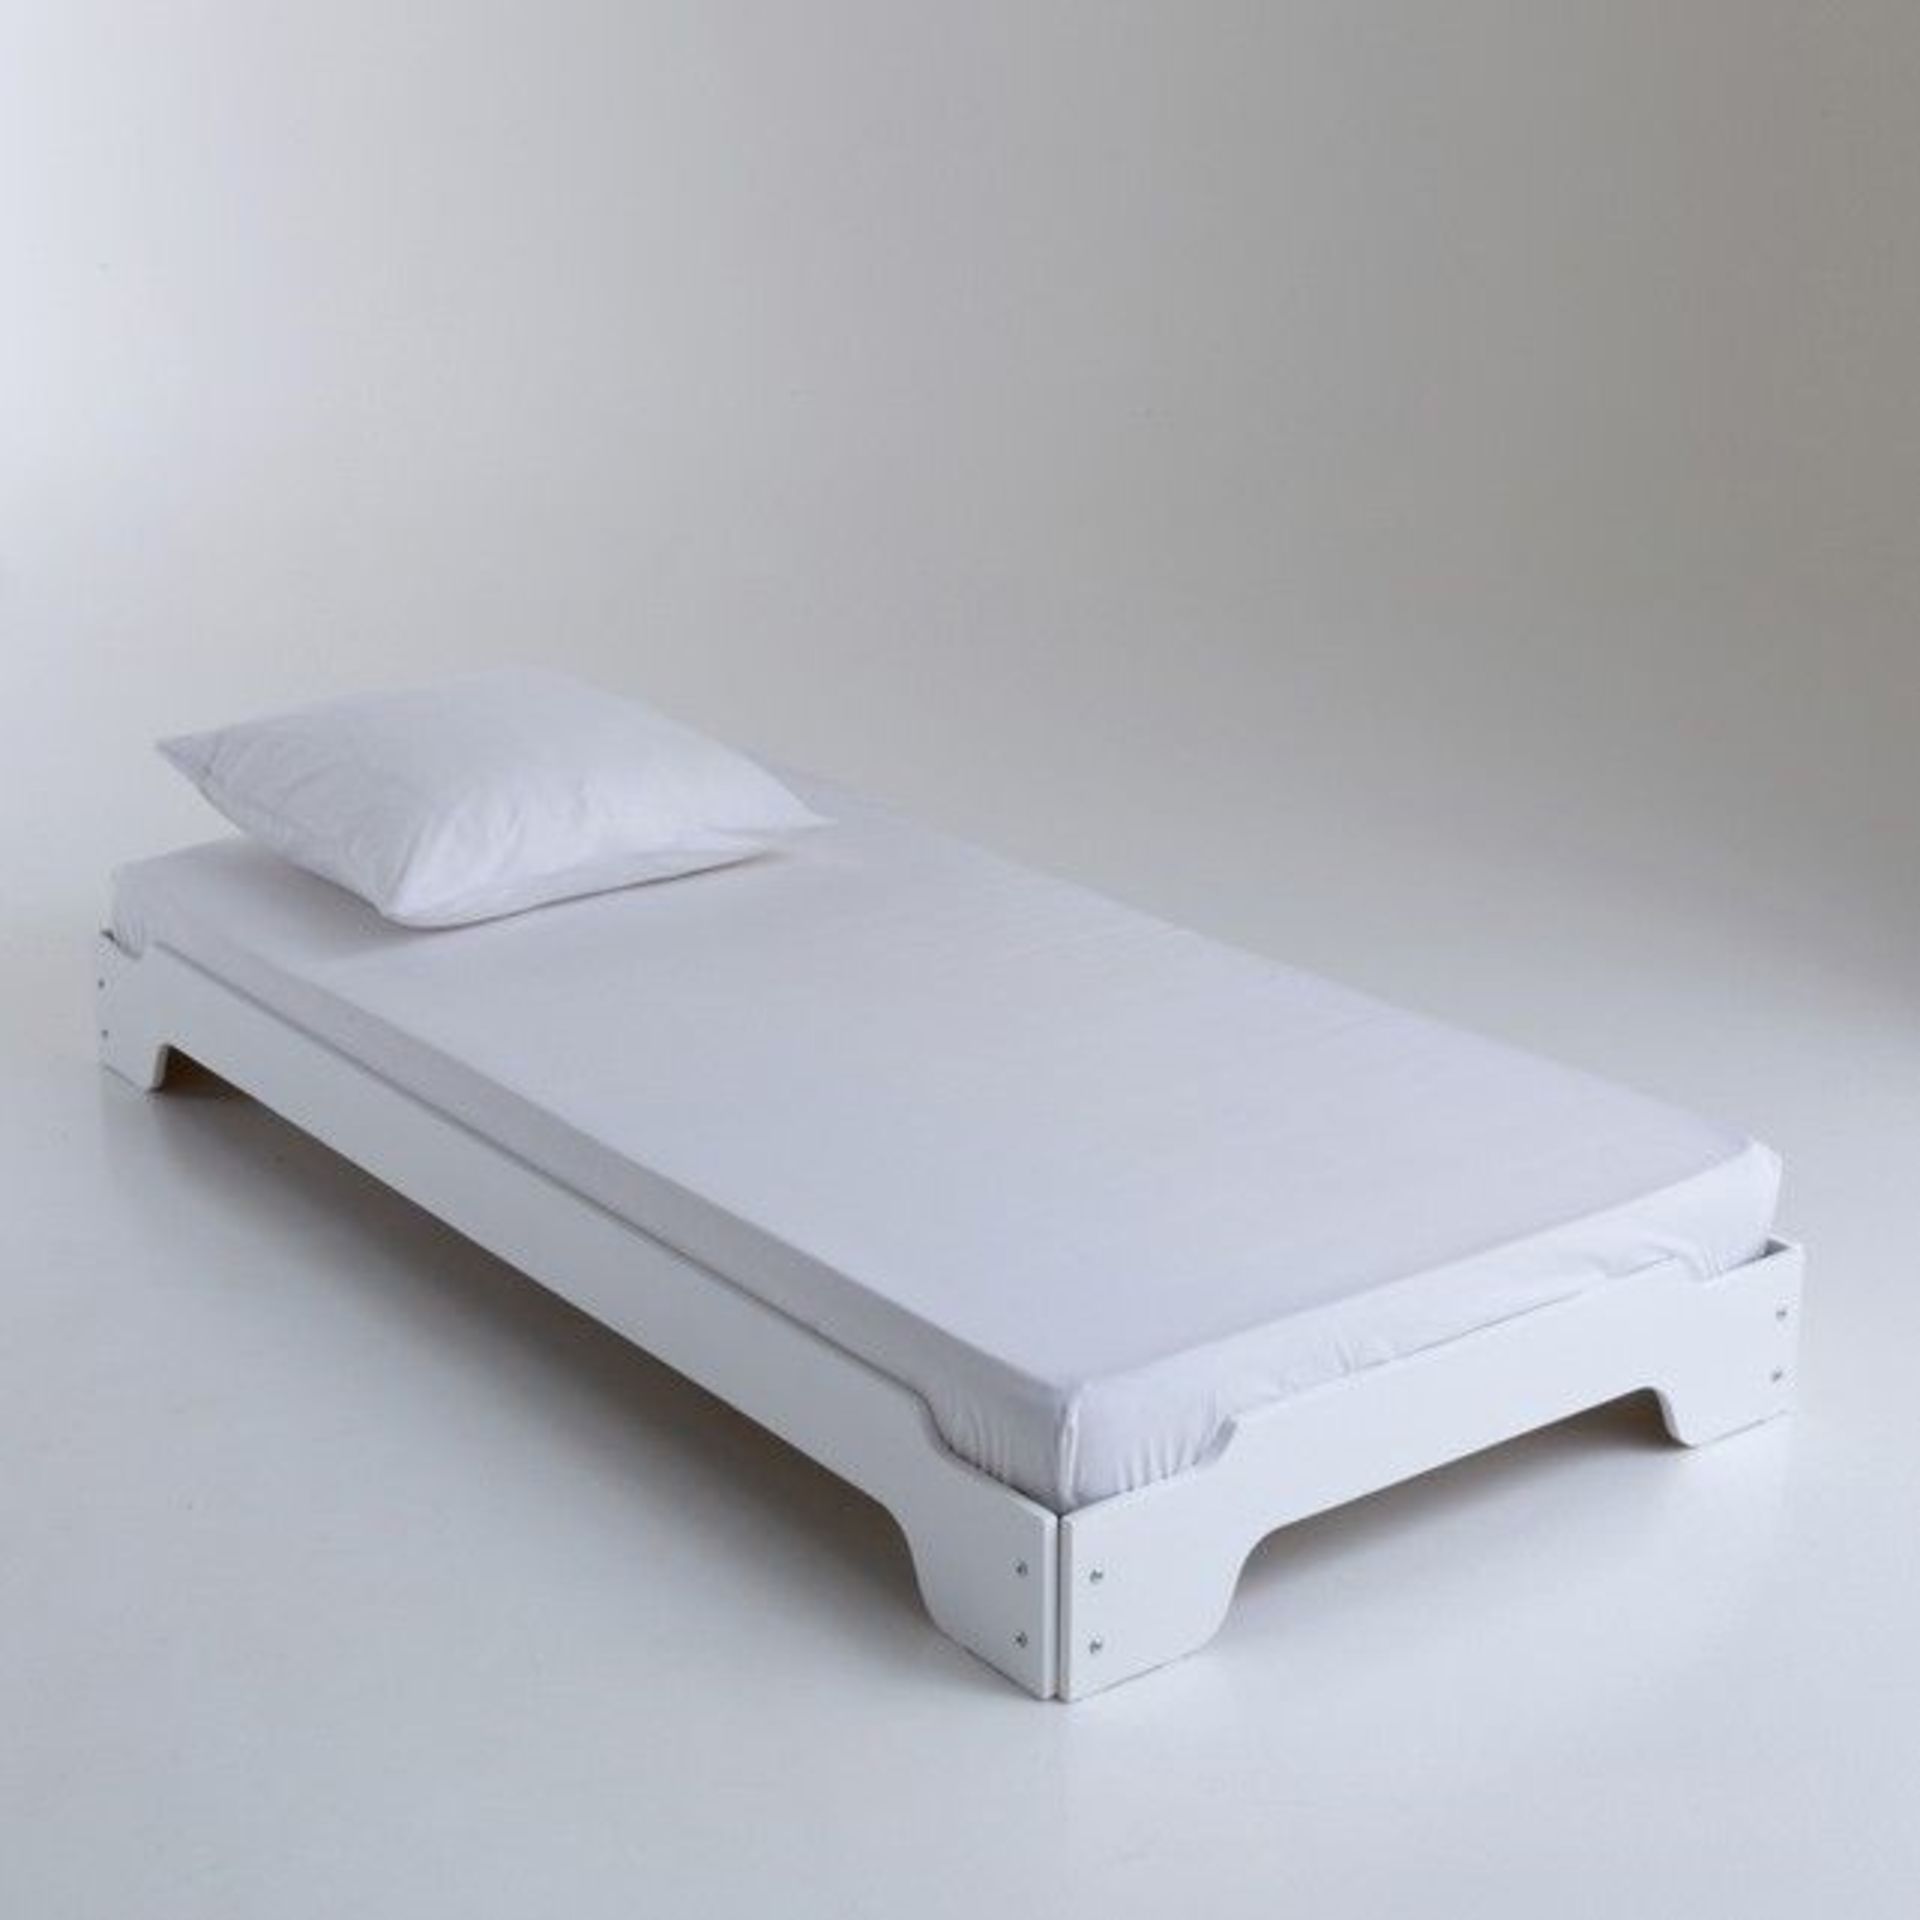 1 GRADE B BOXED LA REDOUTE STACKING BED IN WHITE / RRP £119.99 (VIEWING HIGHLY RECOMMENDED)